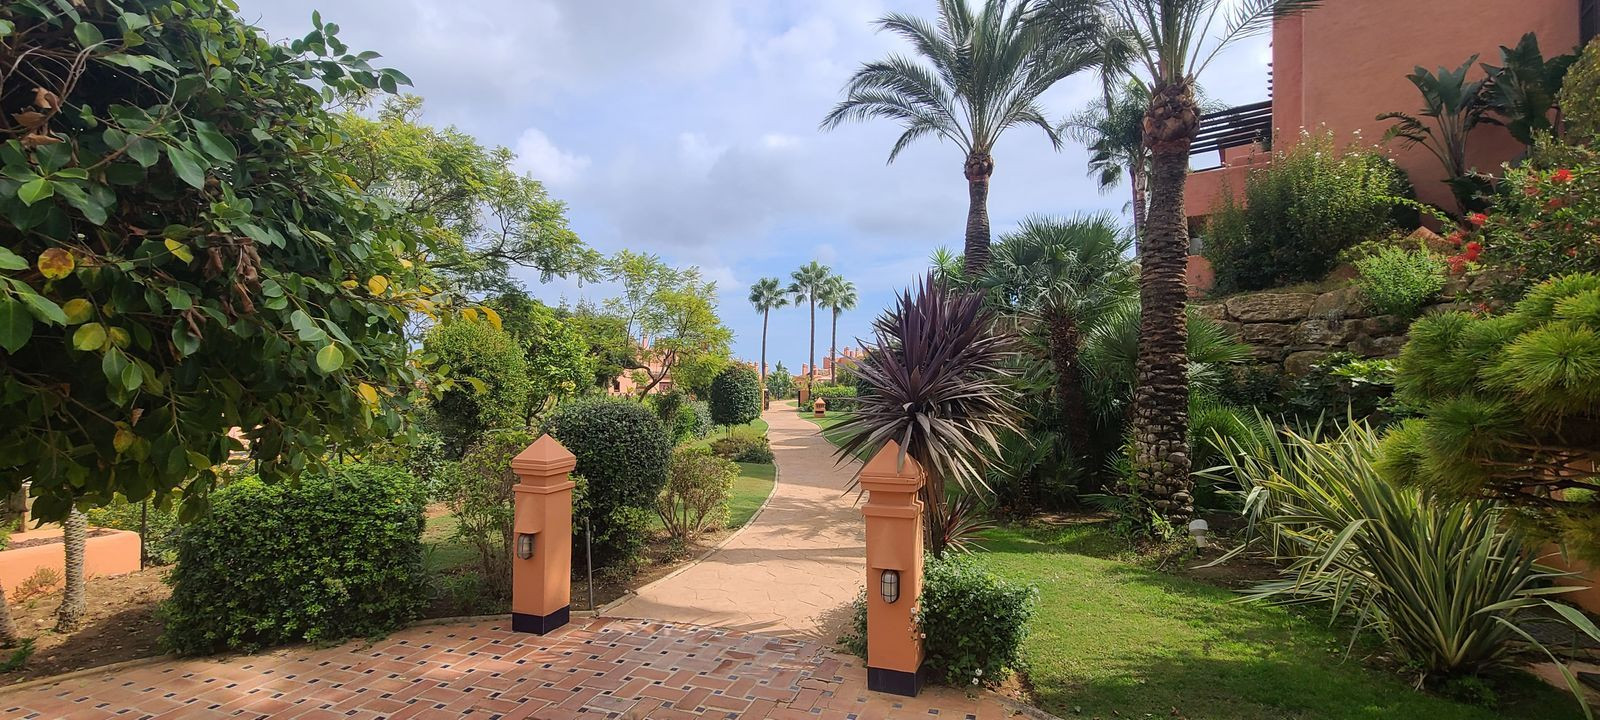 Apartment for sale in Marbella - East 40